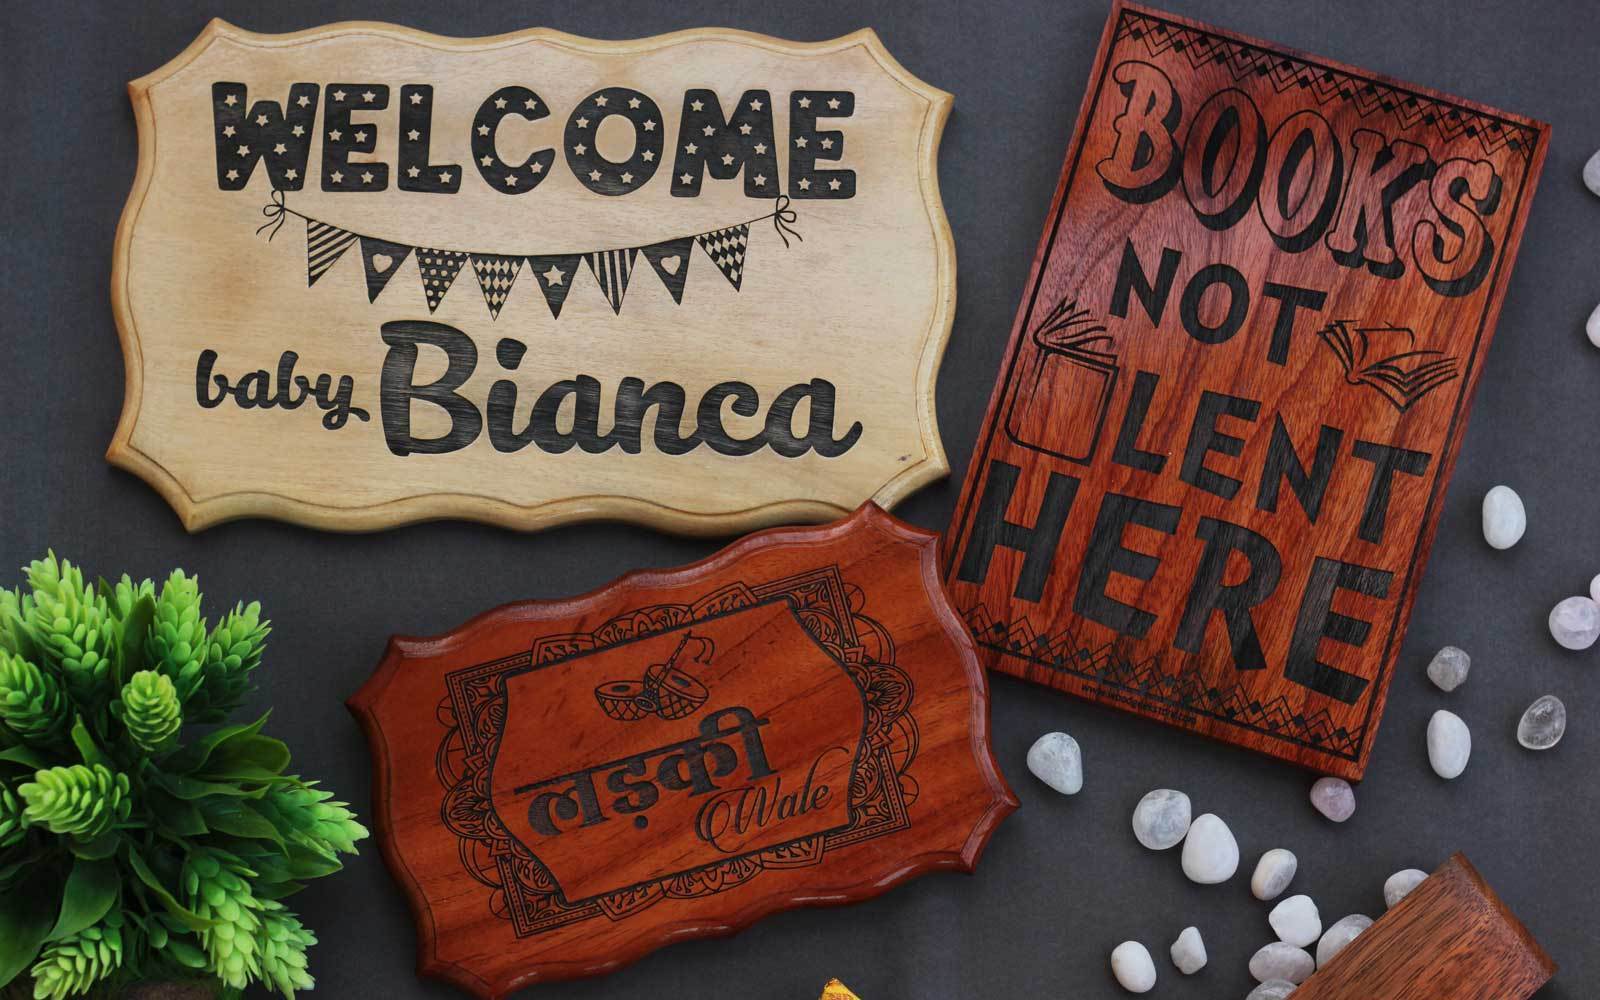 Home Decor: Fun, Inspirational Wood Signs For Your Home & Office!